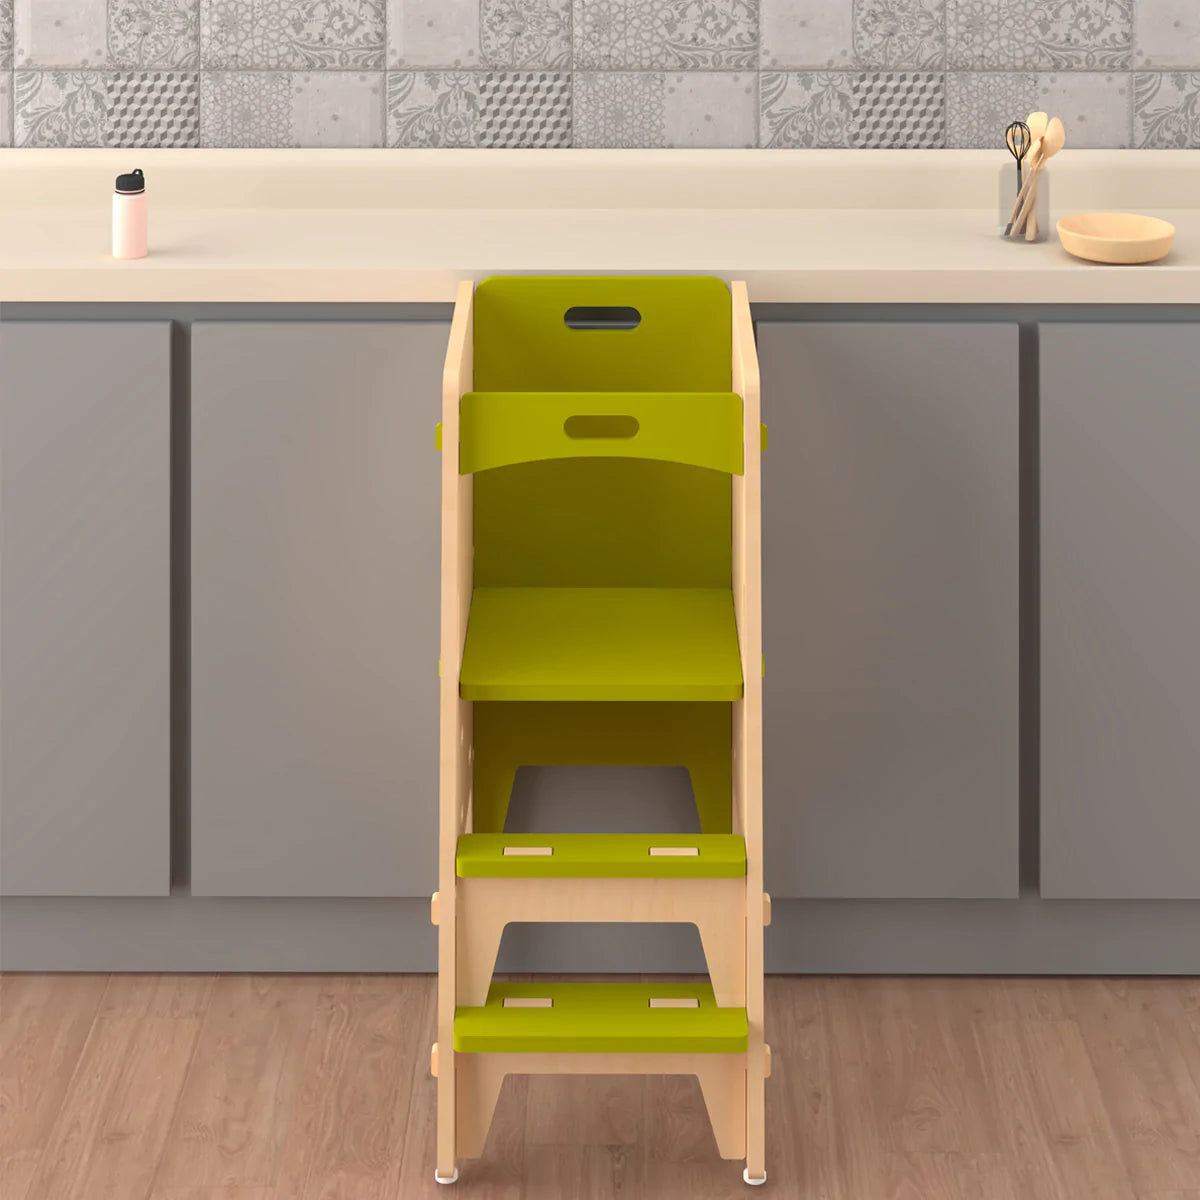 Buy Yellow Lychee Wooden Kitchen Tower - Learning Furniture - SkilloToys.com